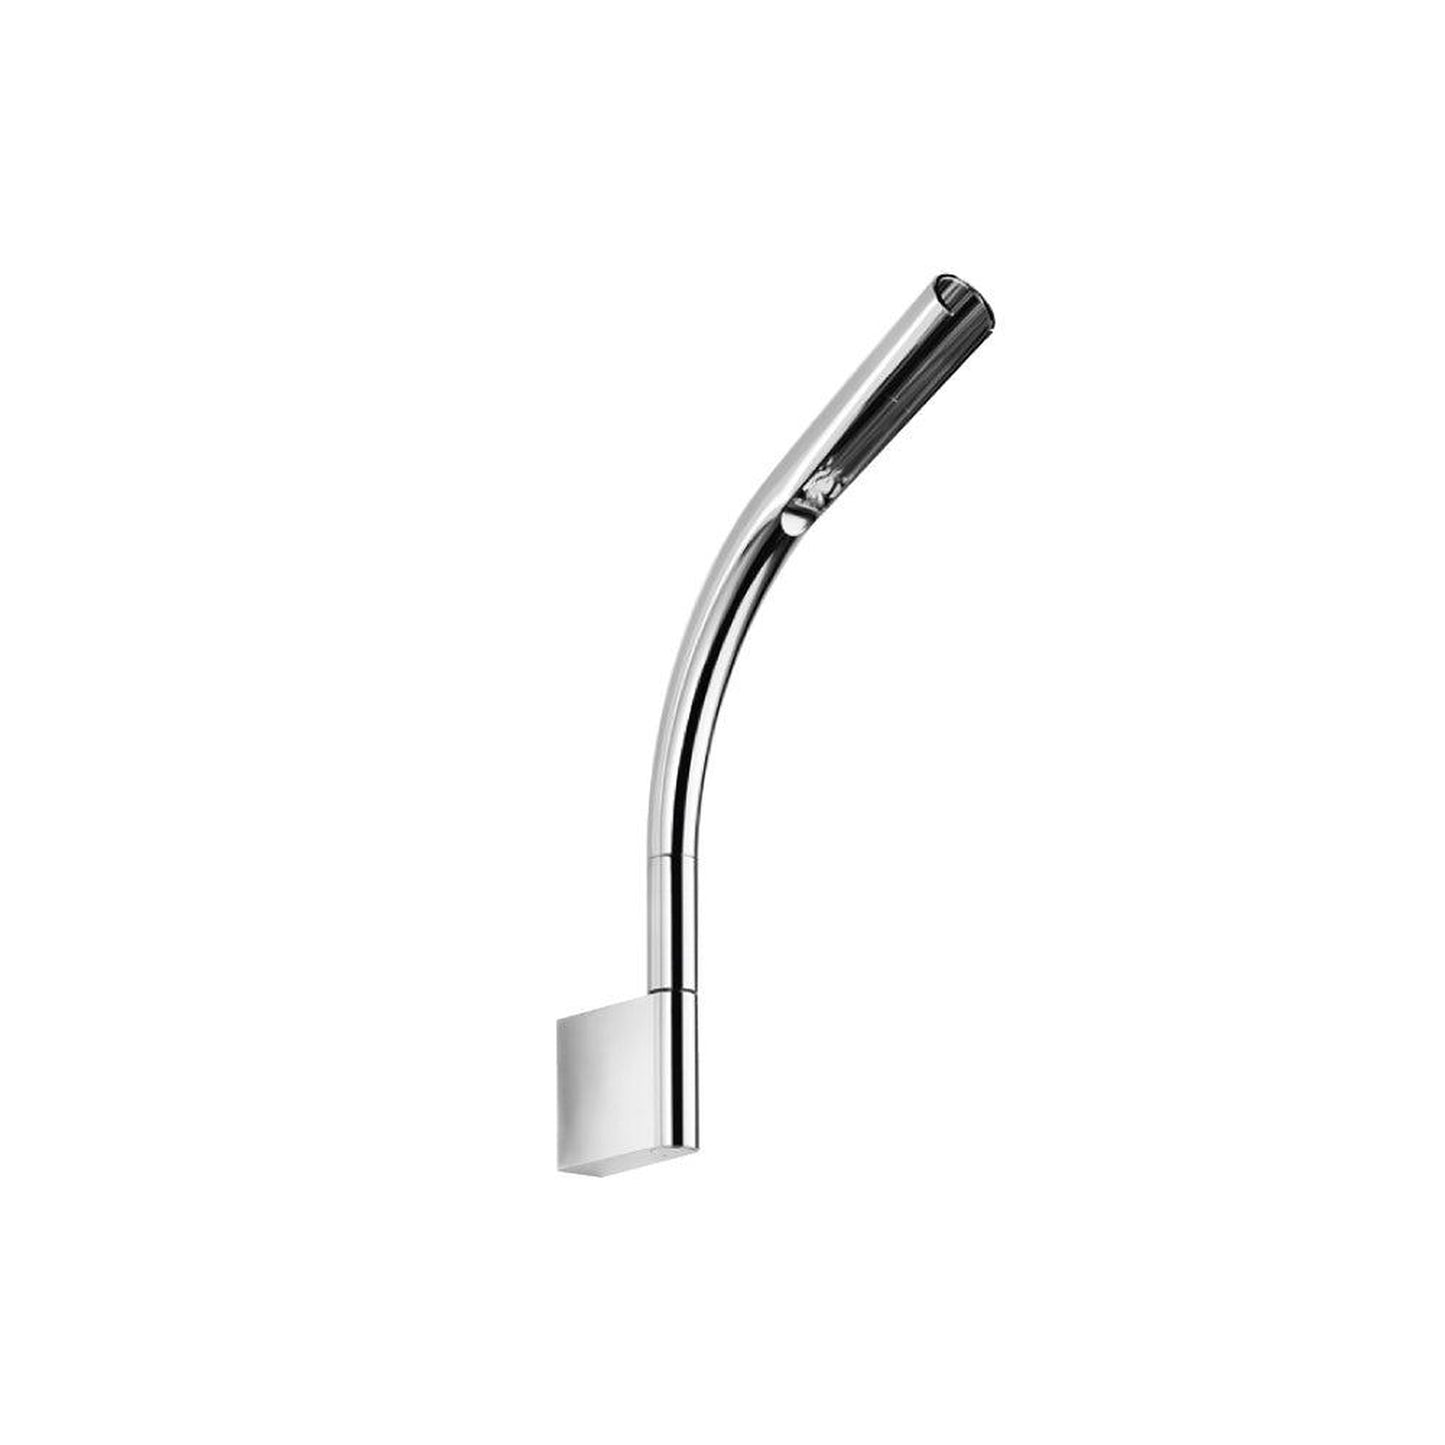 Isenberg Universal Fixtures Rotating / Swivel Shower Arm / Hand Held Holder With Integrated Wall Elbow in Brushed Nickel